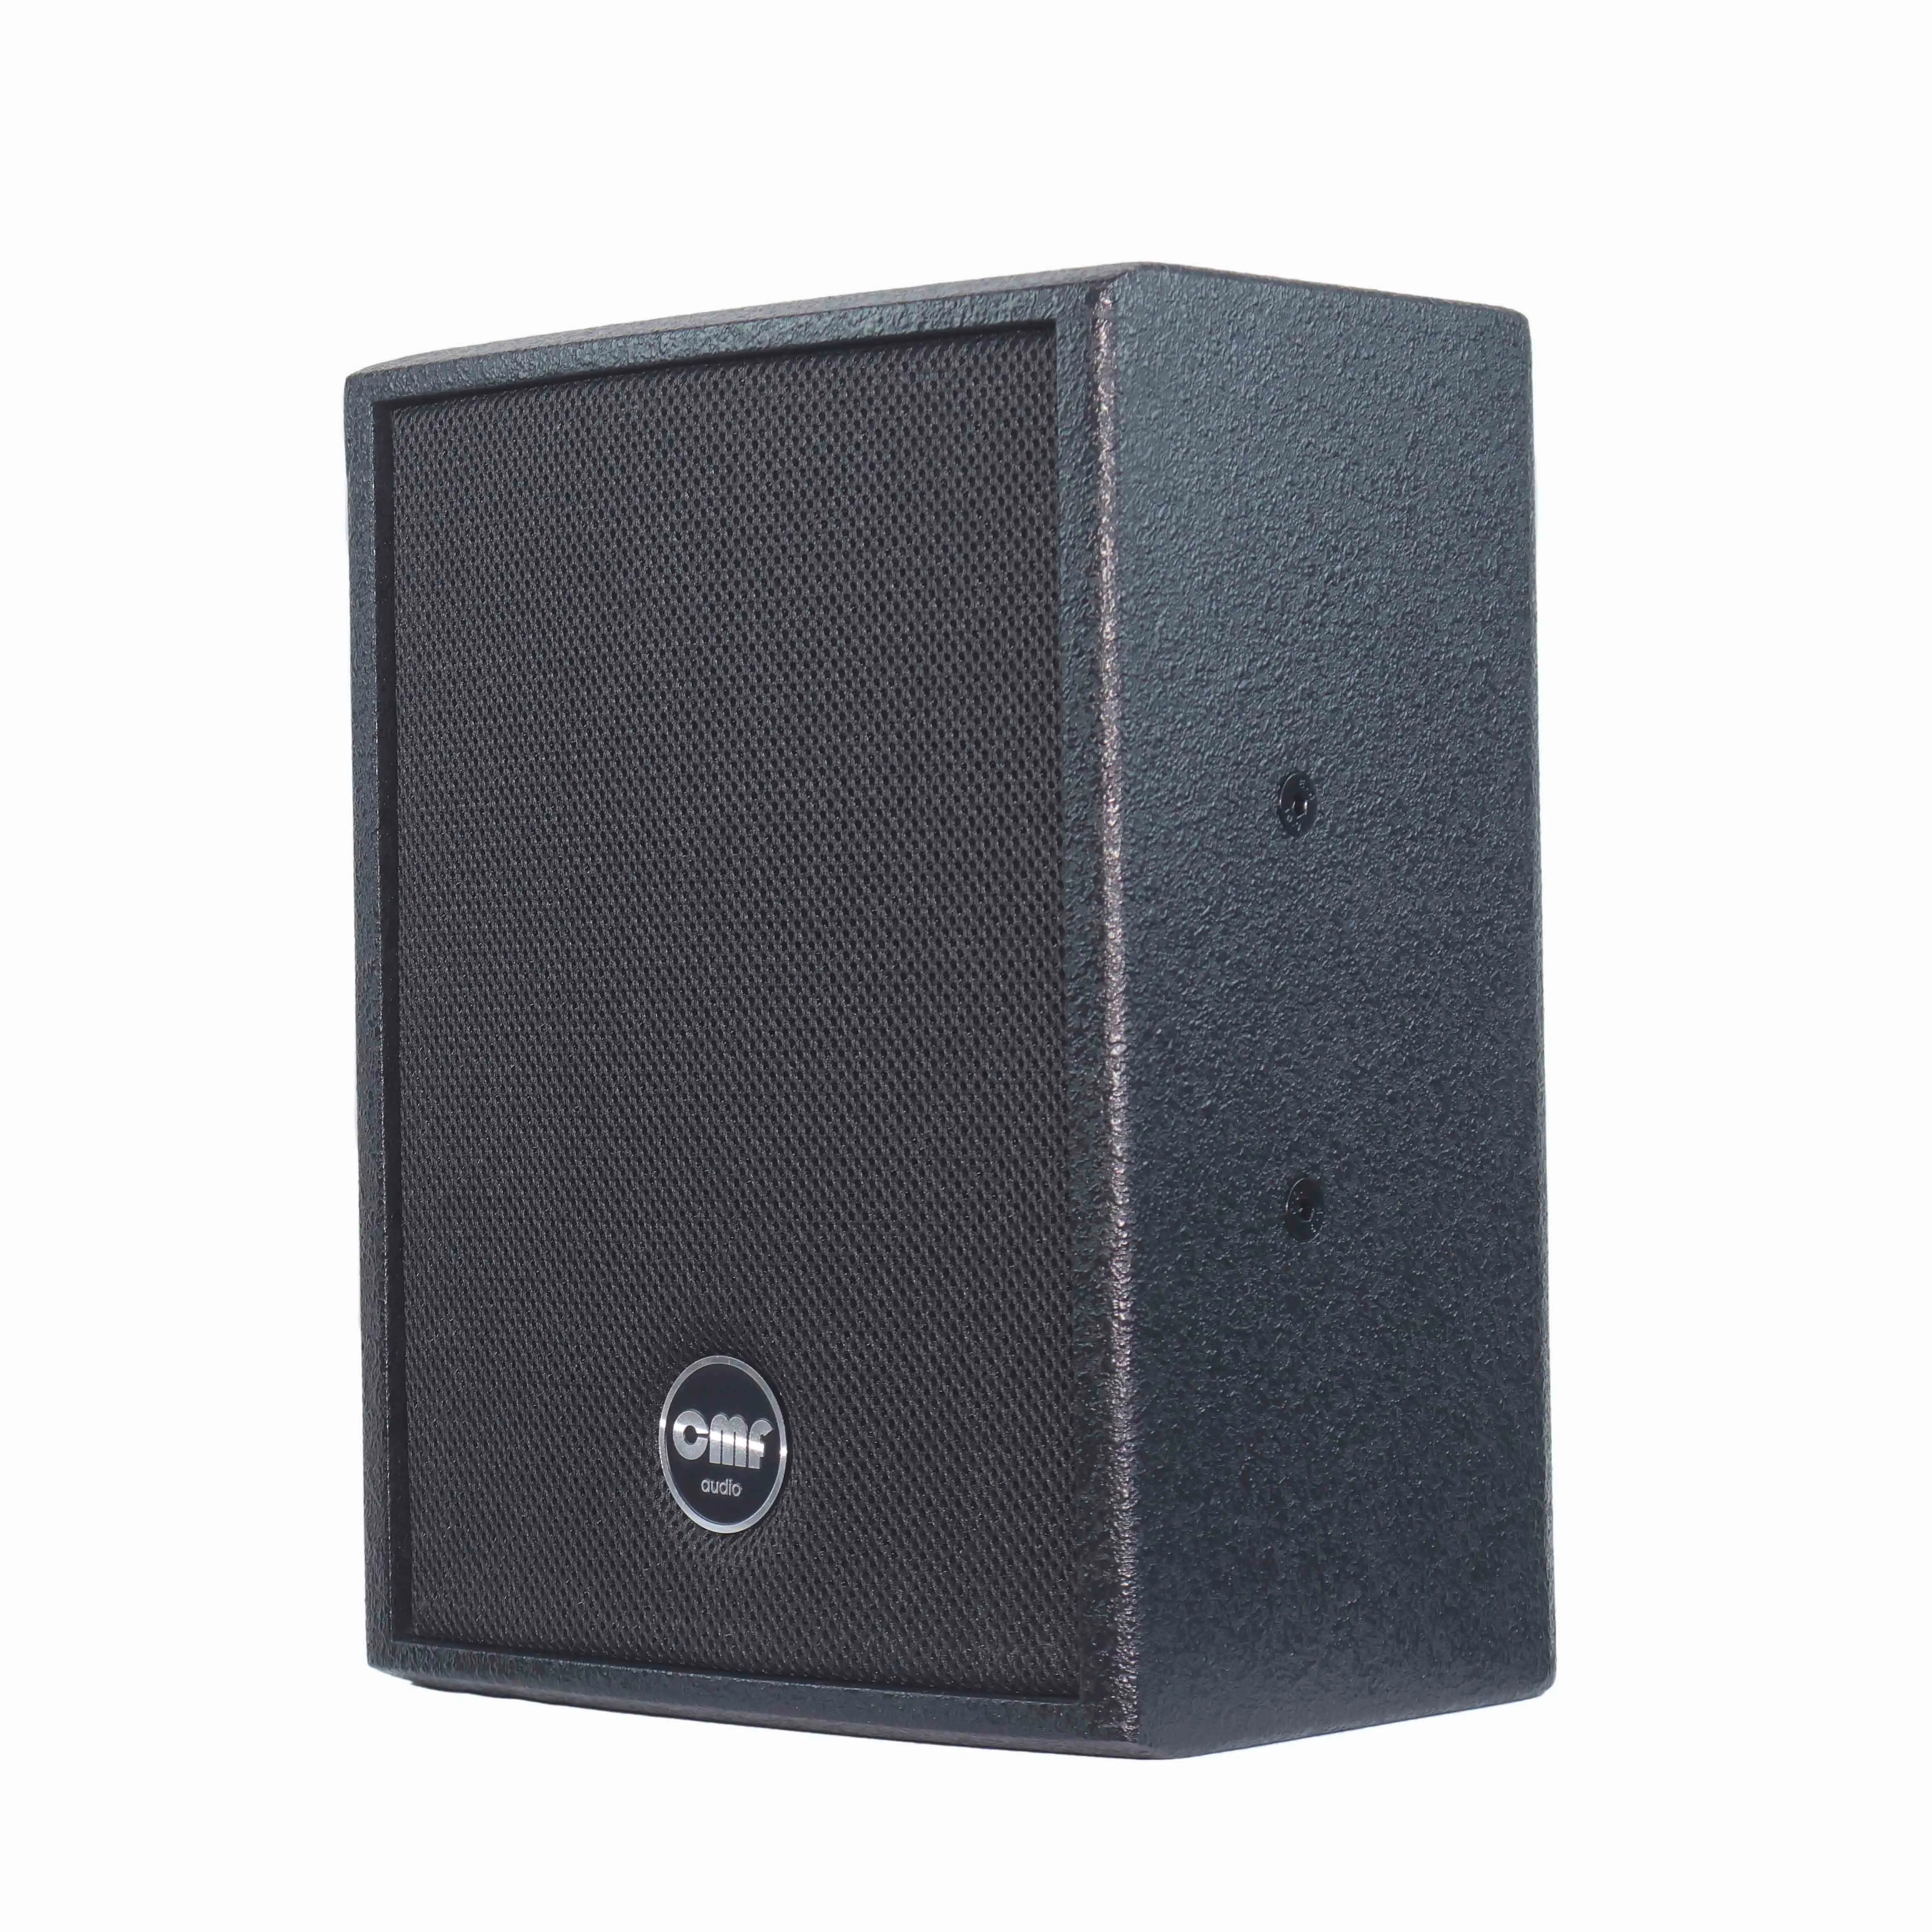 PA system: 8-inch full-range speakers, professional DJ monitoring system, audio coaxial audio